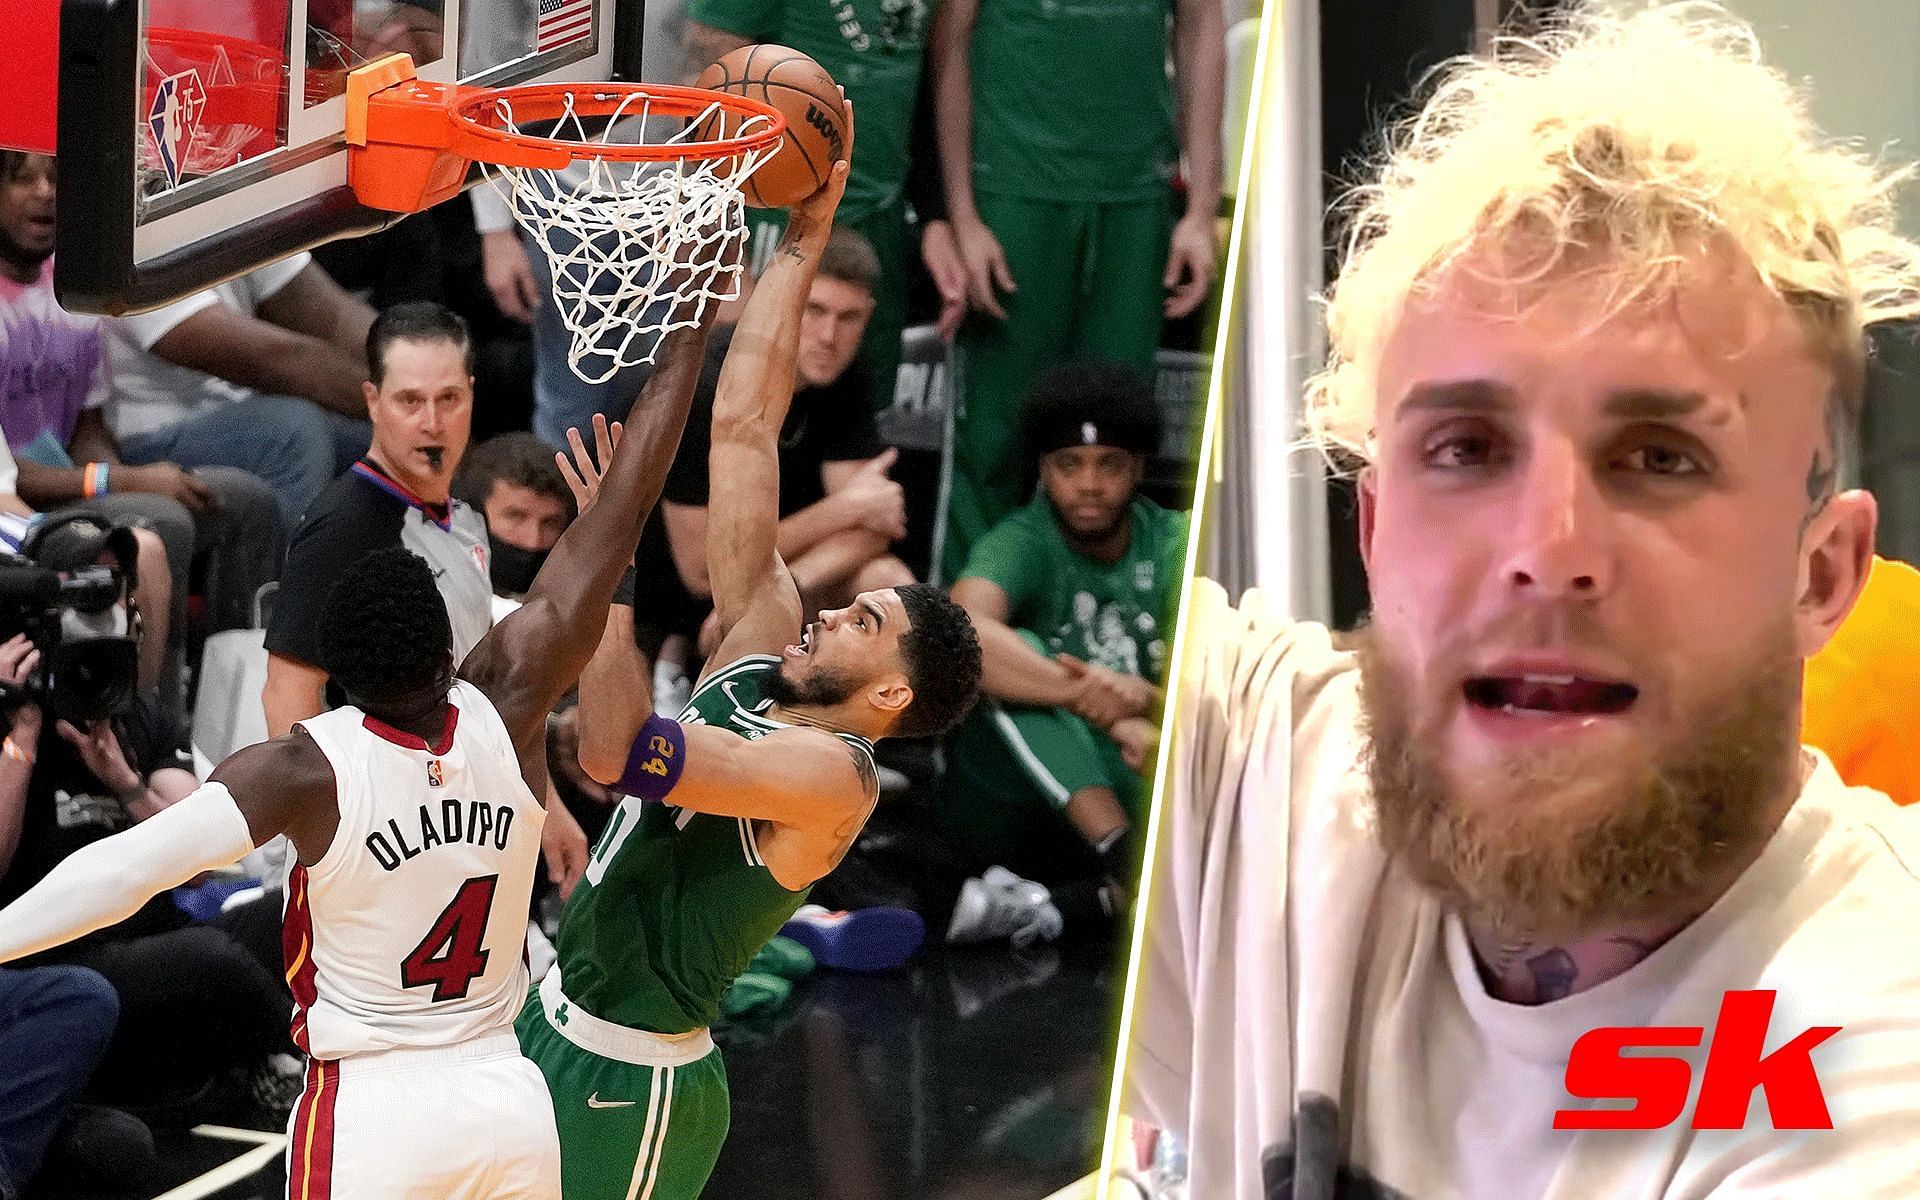 Jake Paul reacts to the razor-close game between Boston Celtics and Miami Heat [Image credits: @betr on Twitter]